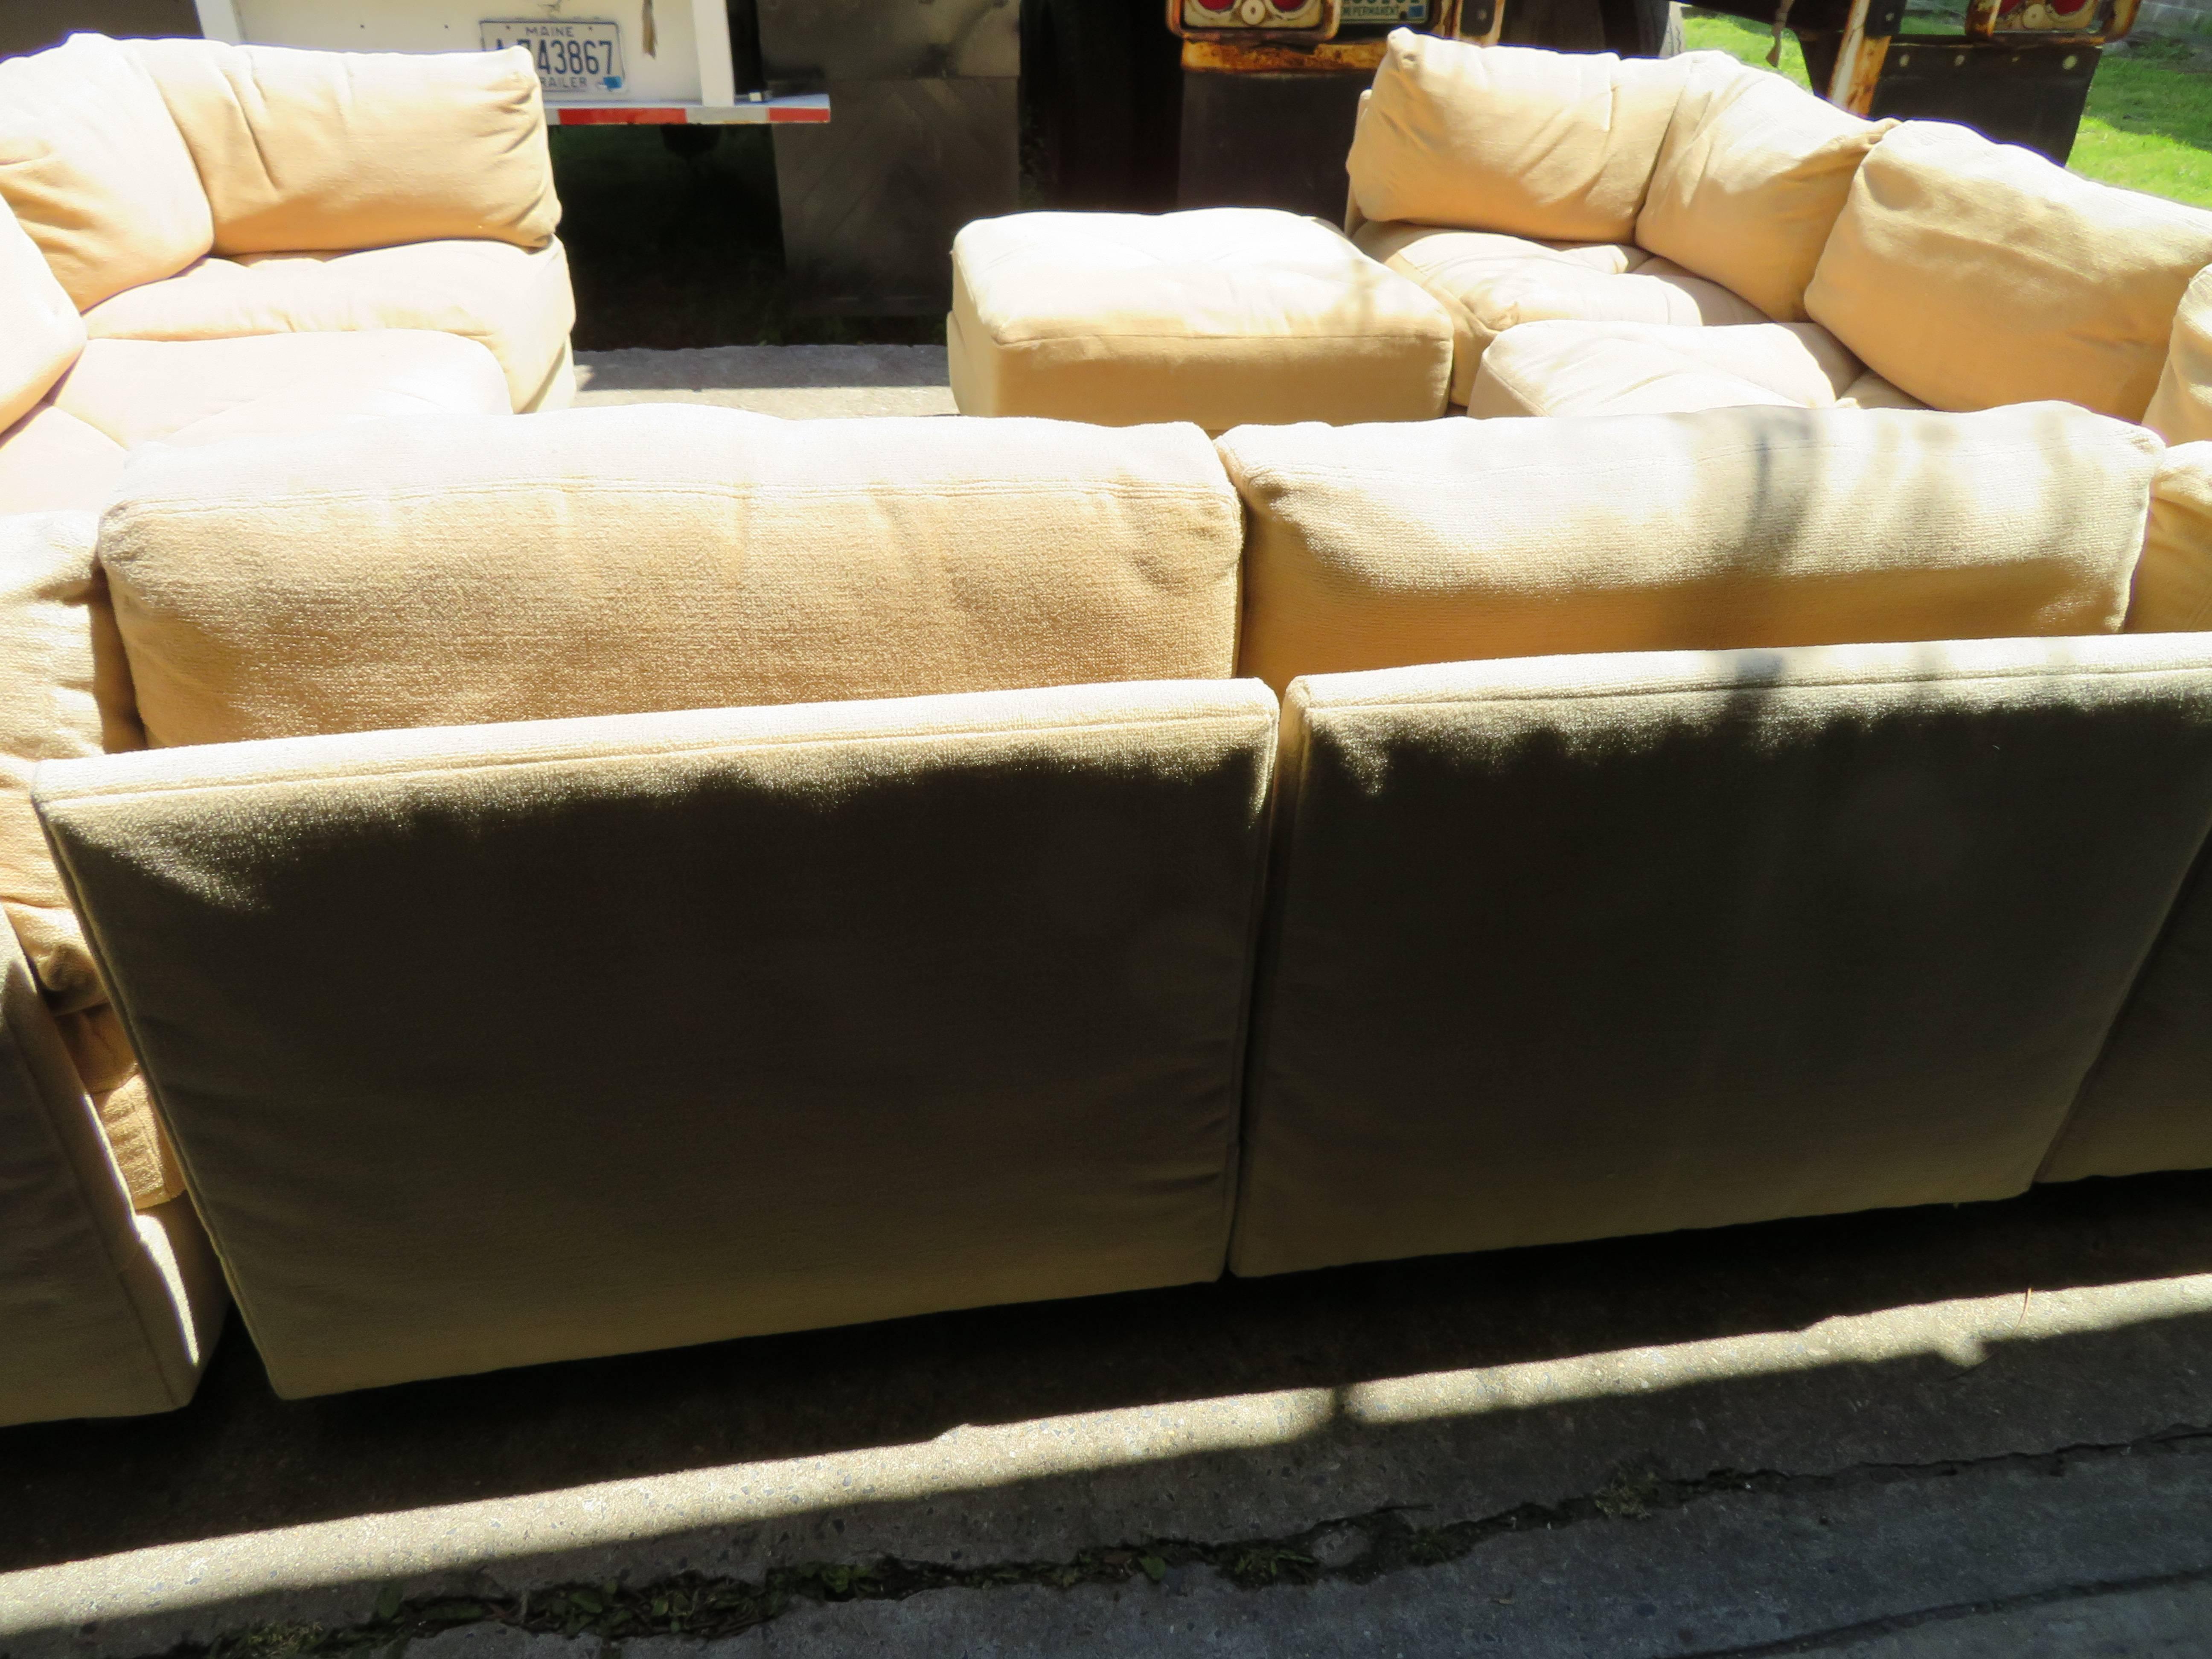 Upholstery Huge Milo Baughman Style Ten-Piece Section Sofa Pit Mid-Century Modern Selig